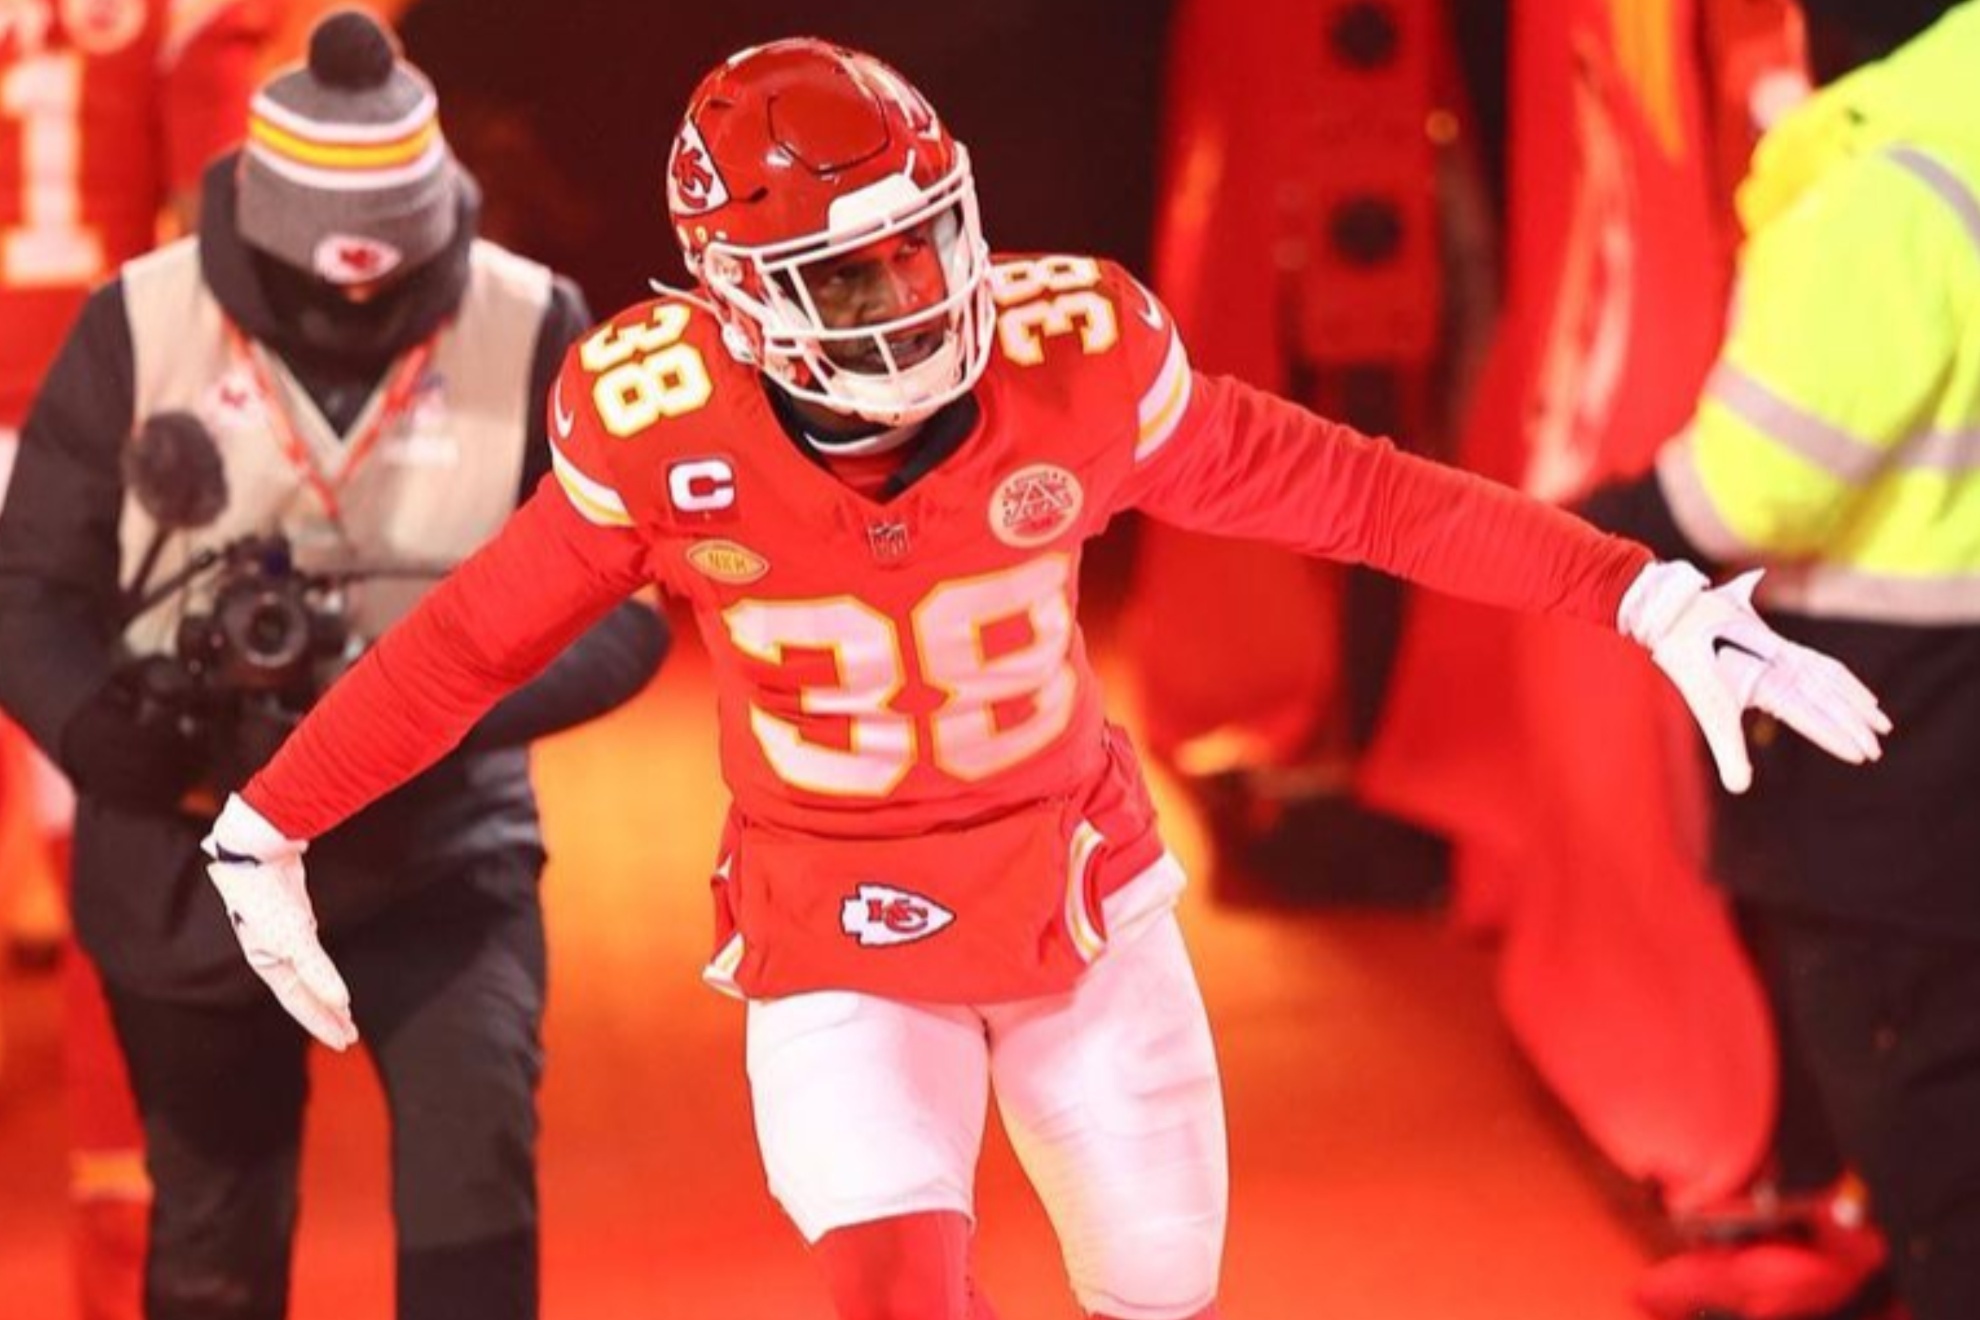 The Search for Sneed's Successor: Top 5 Cornerback Targets for the Kansas City Chiefs